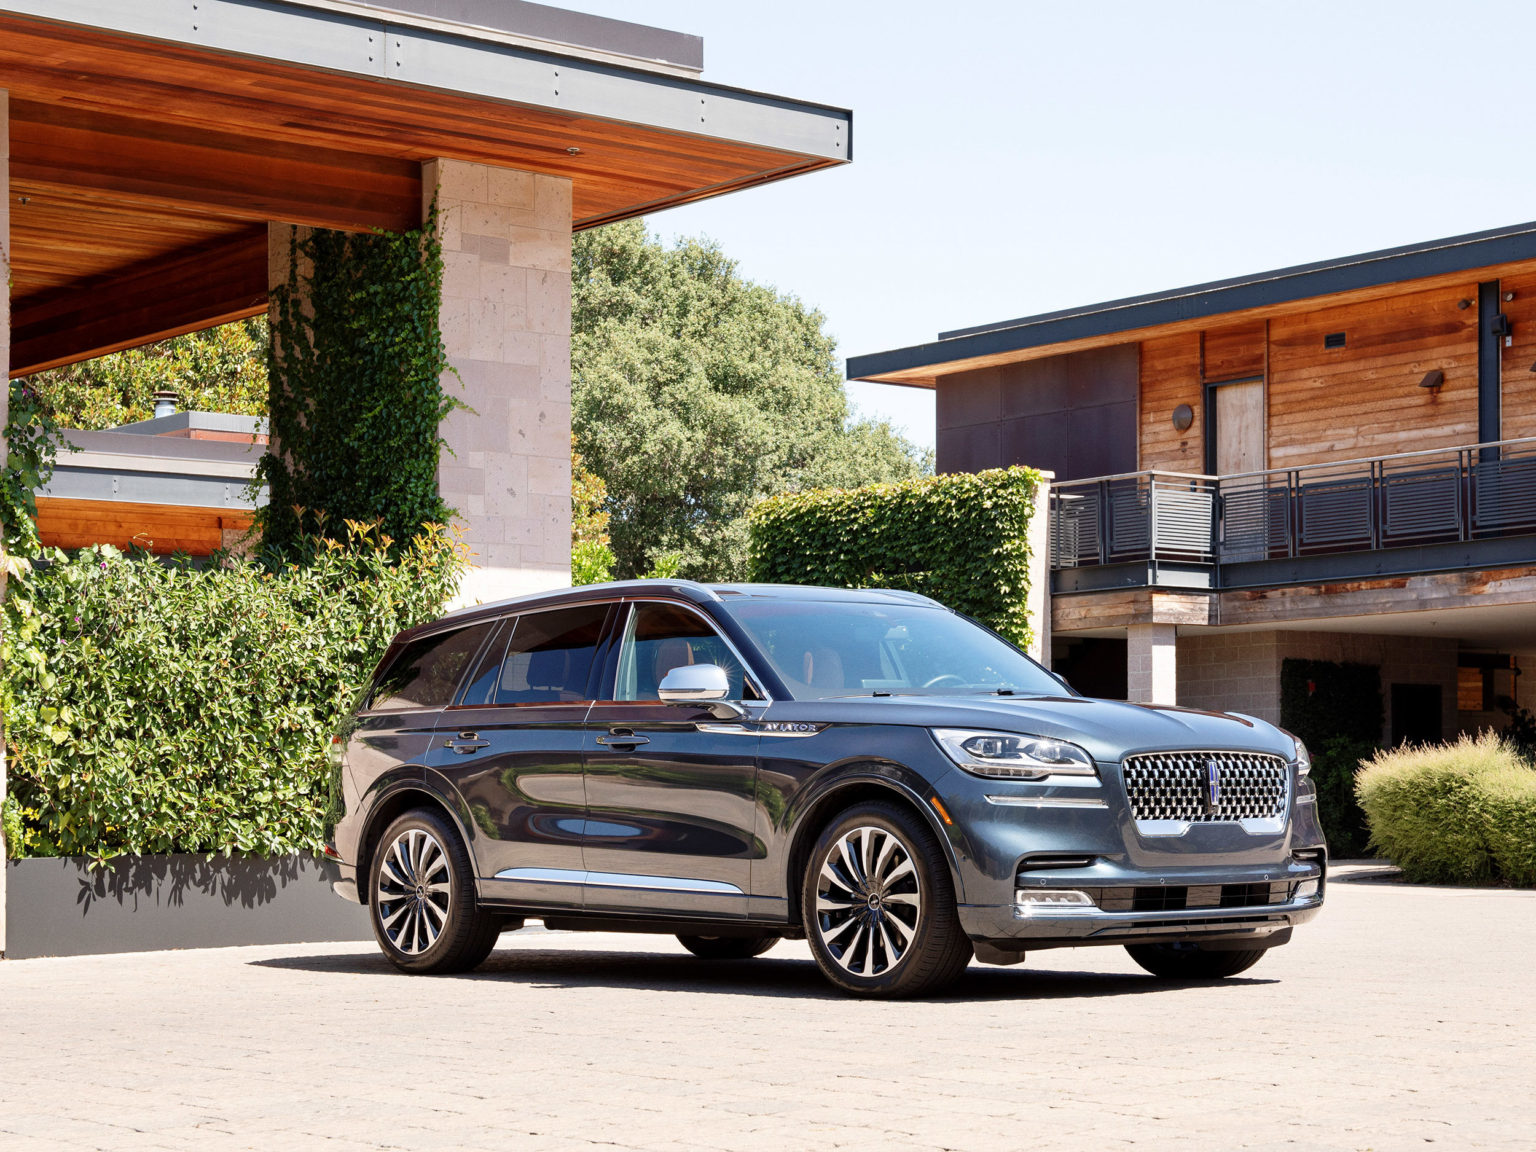 The Lincoln Aviator is regal looking but not great to drive or ride in.